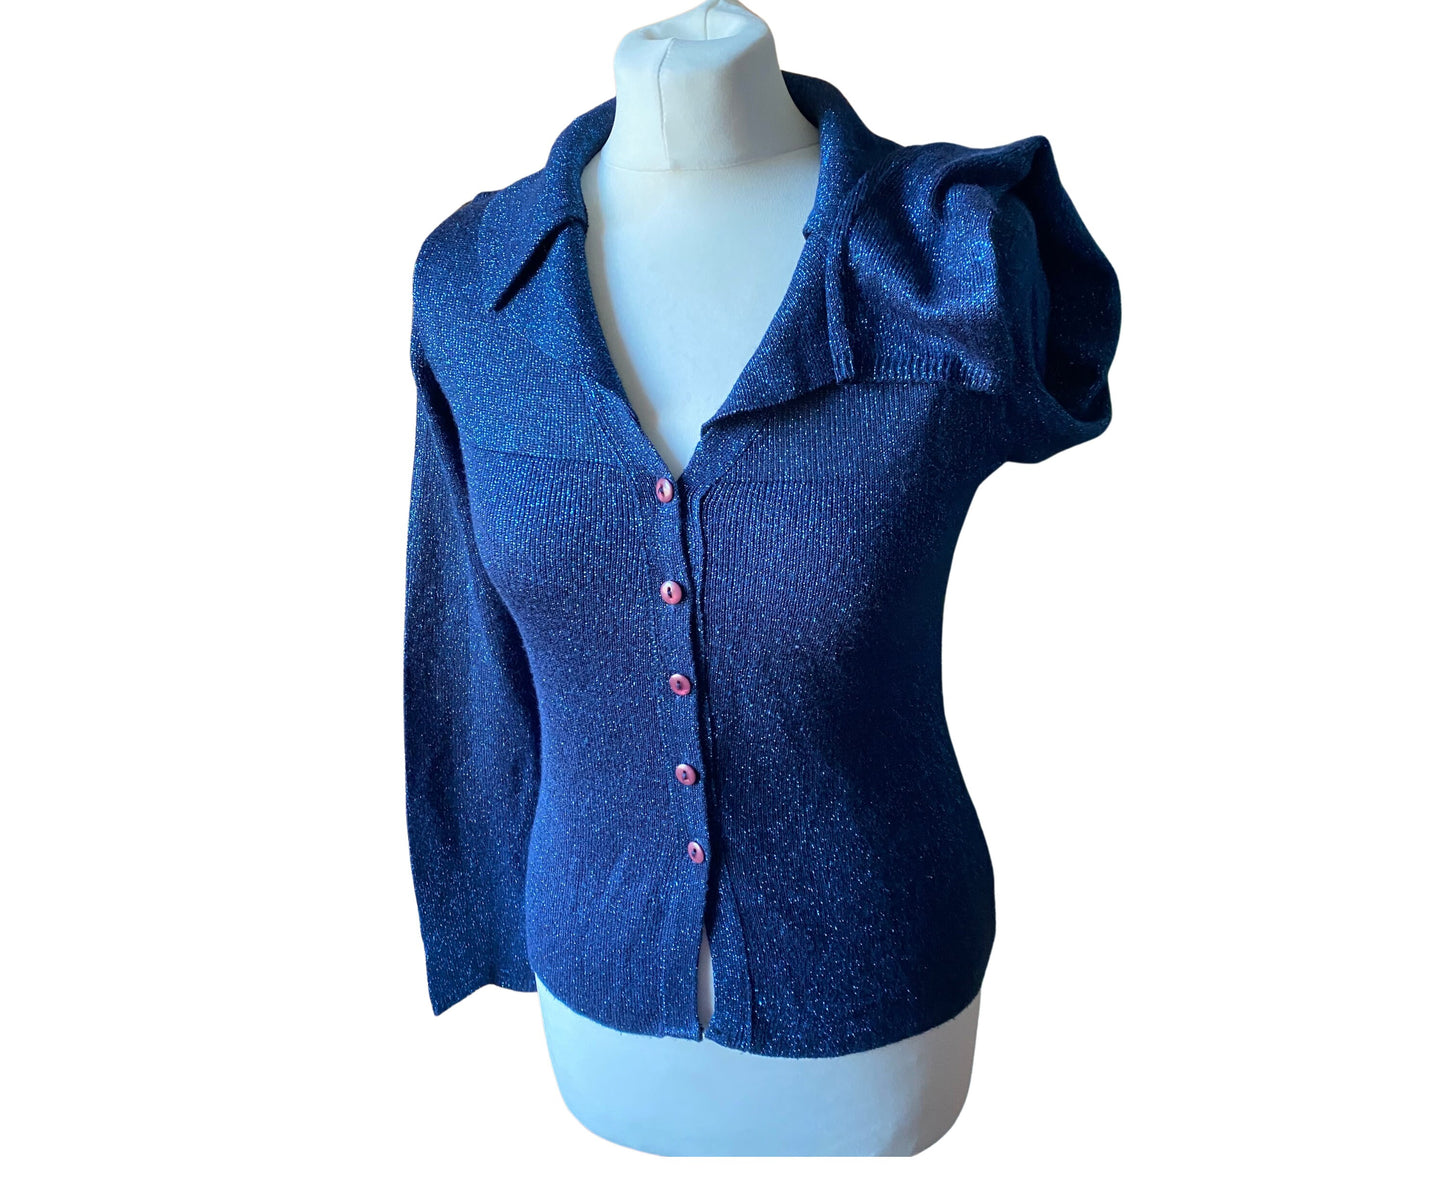 90s blue sparkly lightweight cardigan /top .Approx UK size 8-10